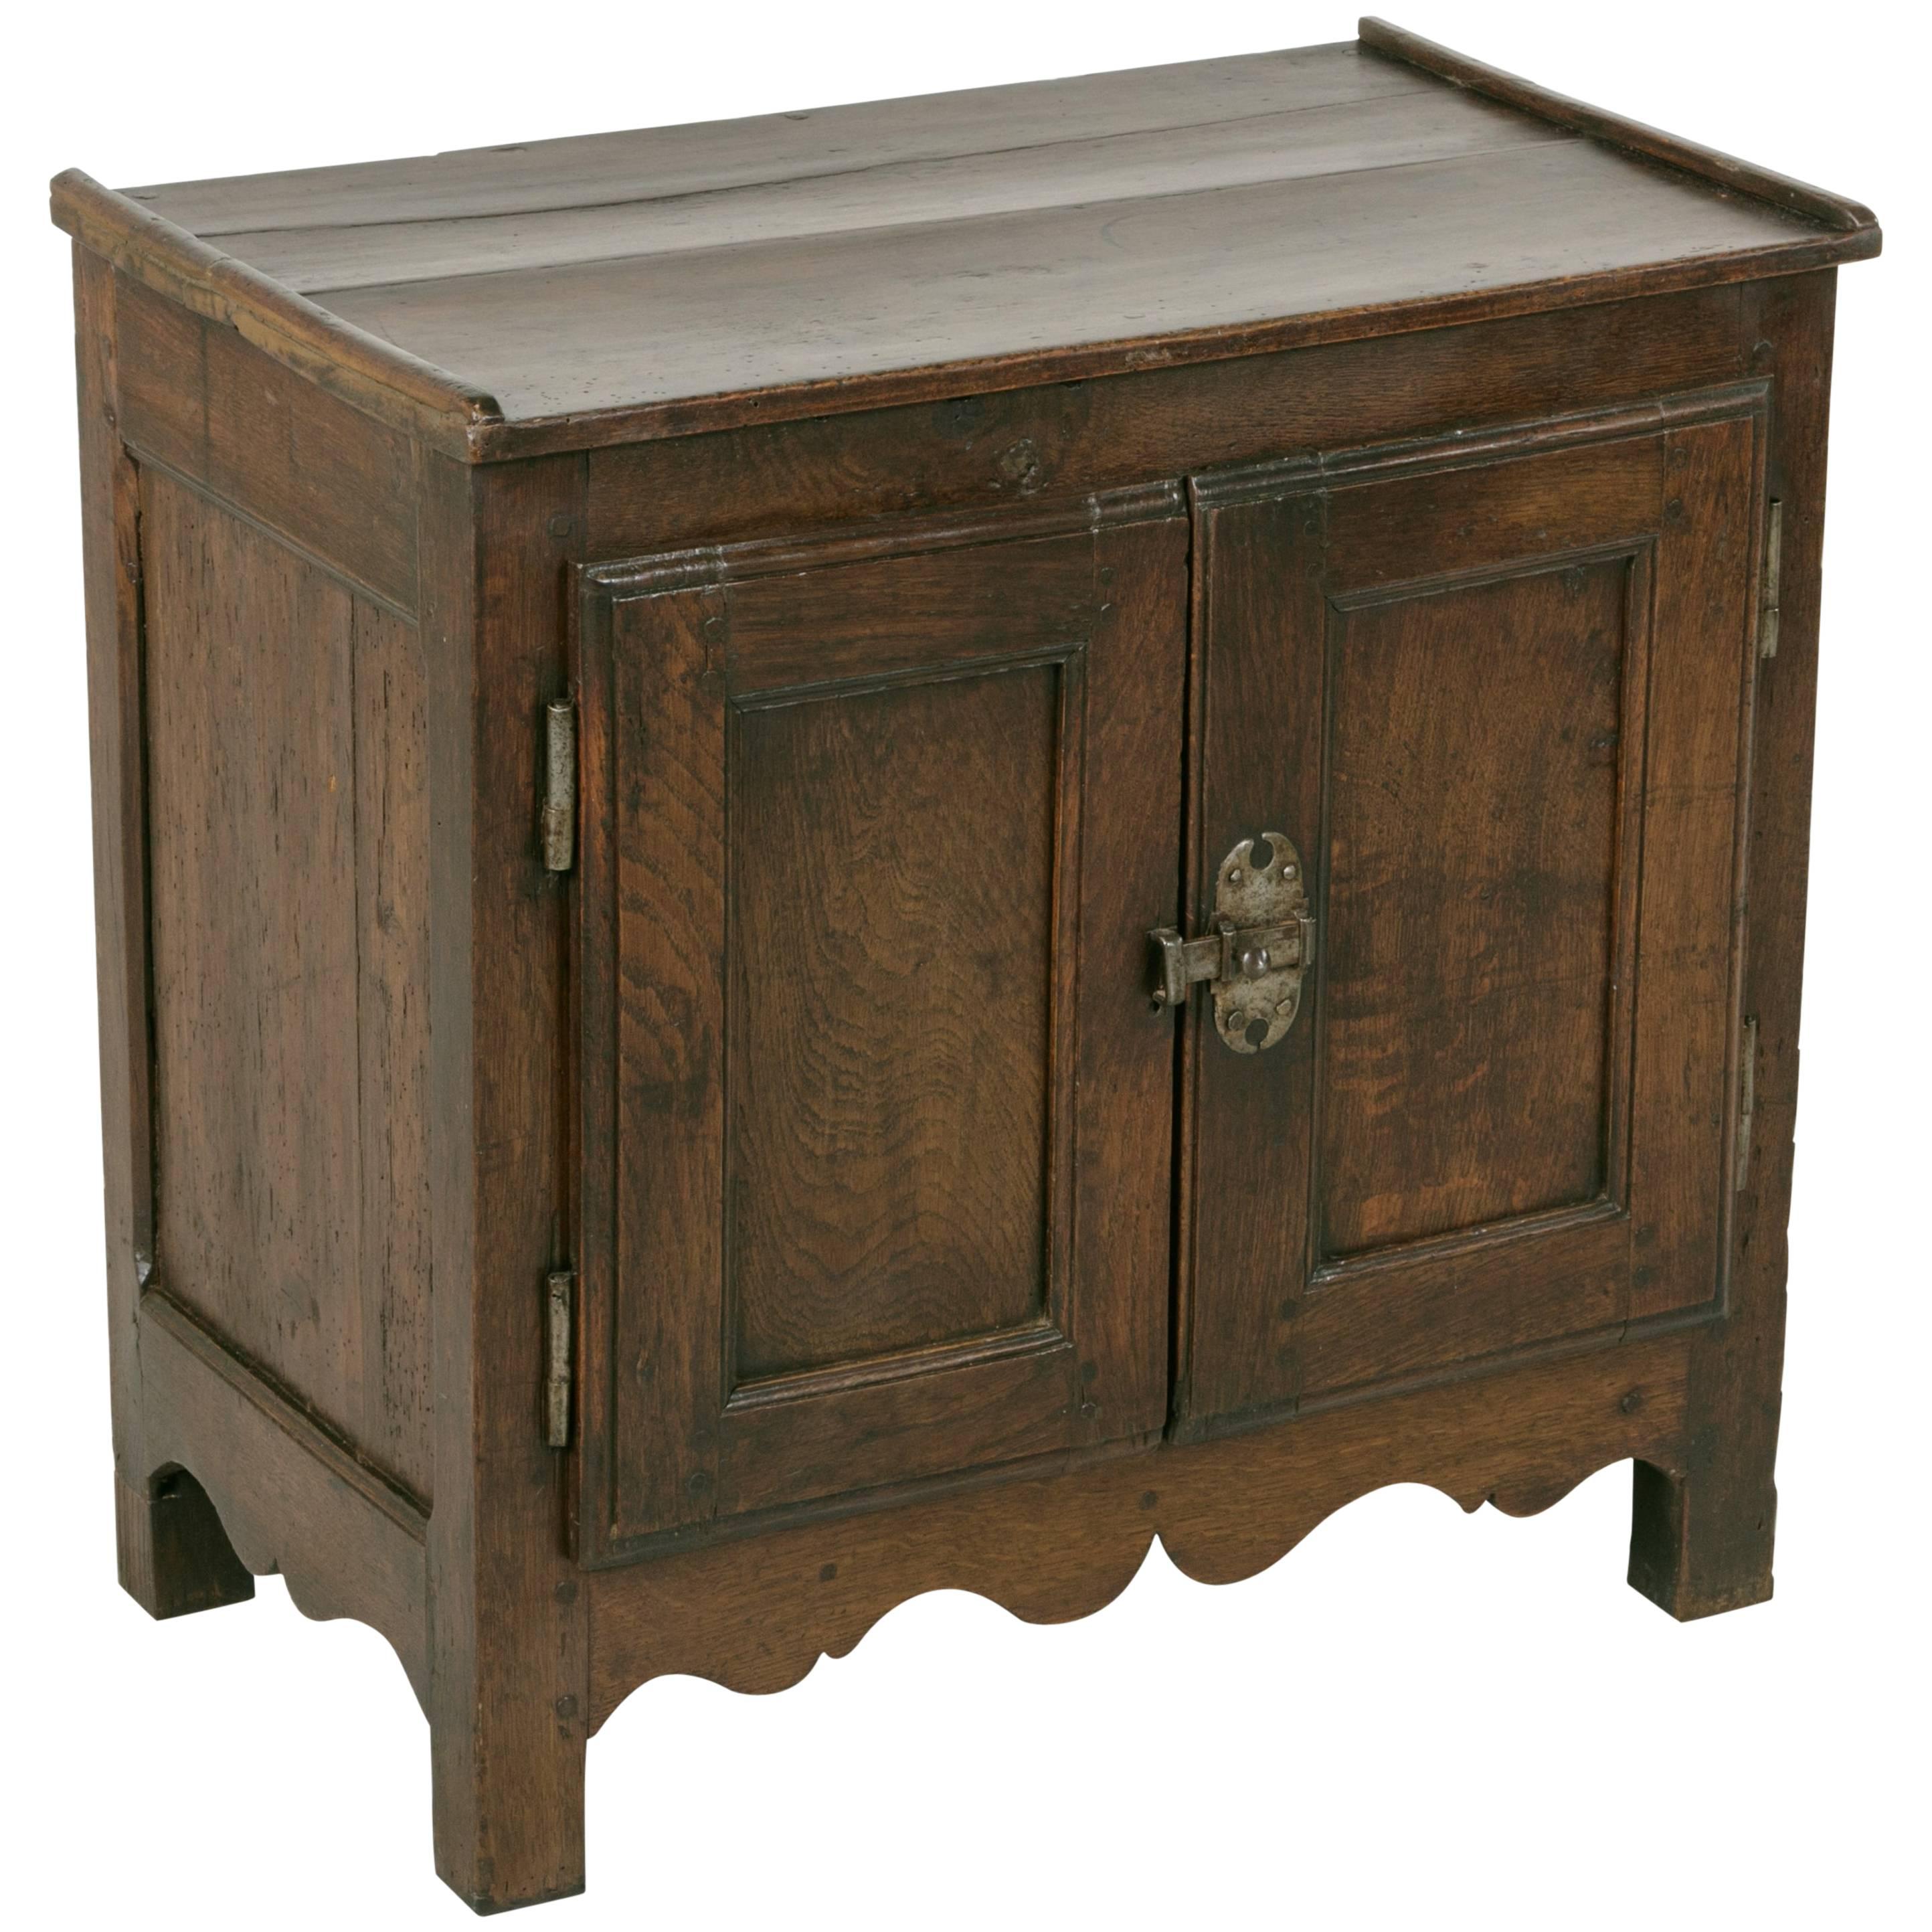 18th Century French Cabinet Side Table Solid Oak with Iron Latch from Normandy